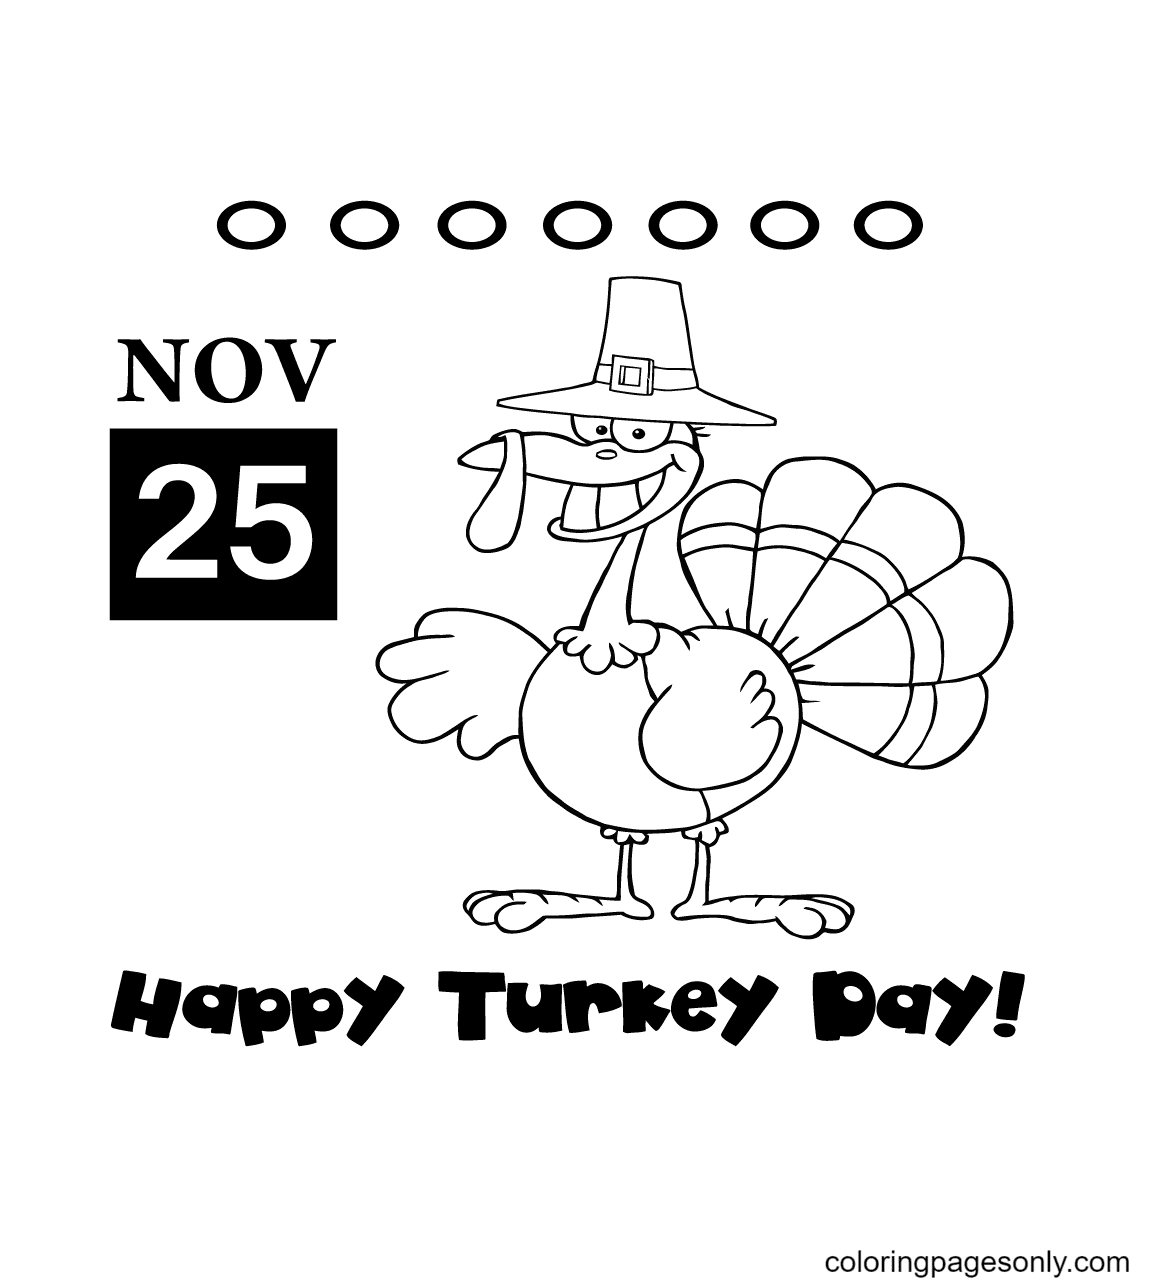 Happy Turkey Day Coloring Page